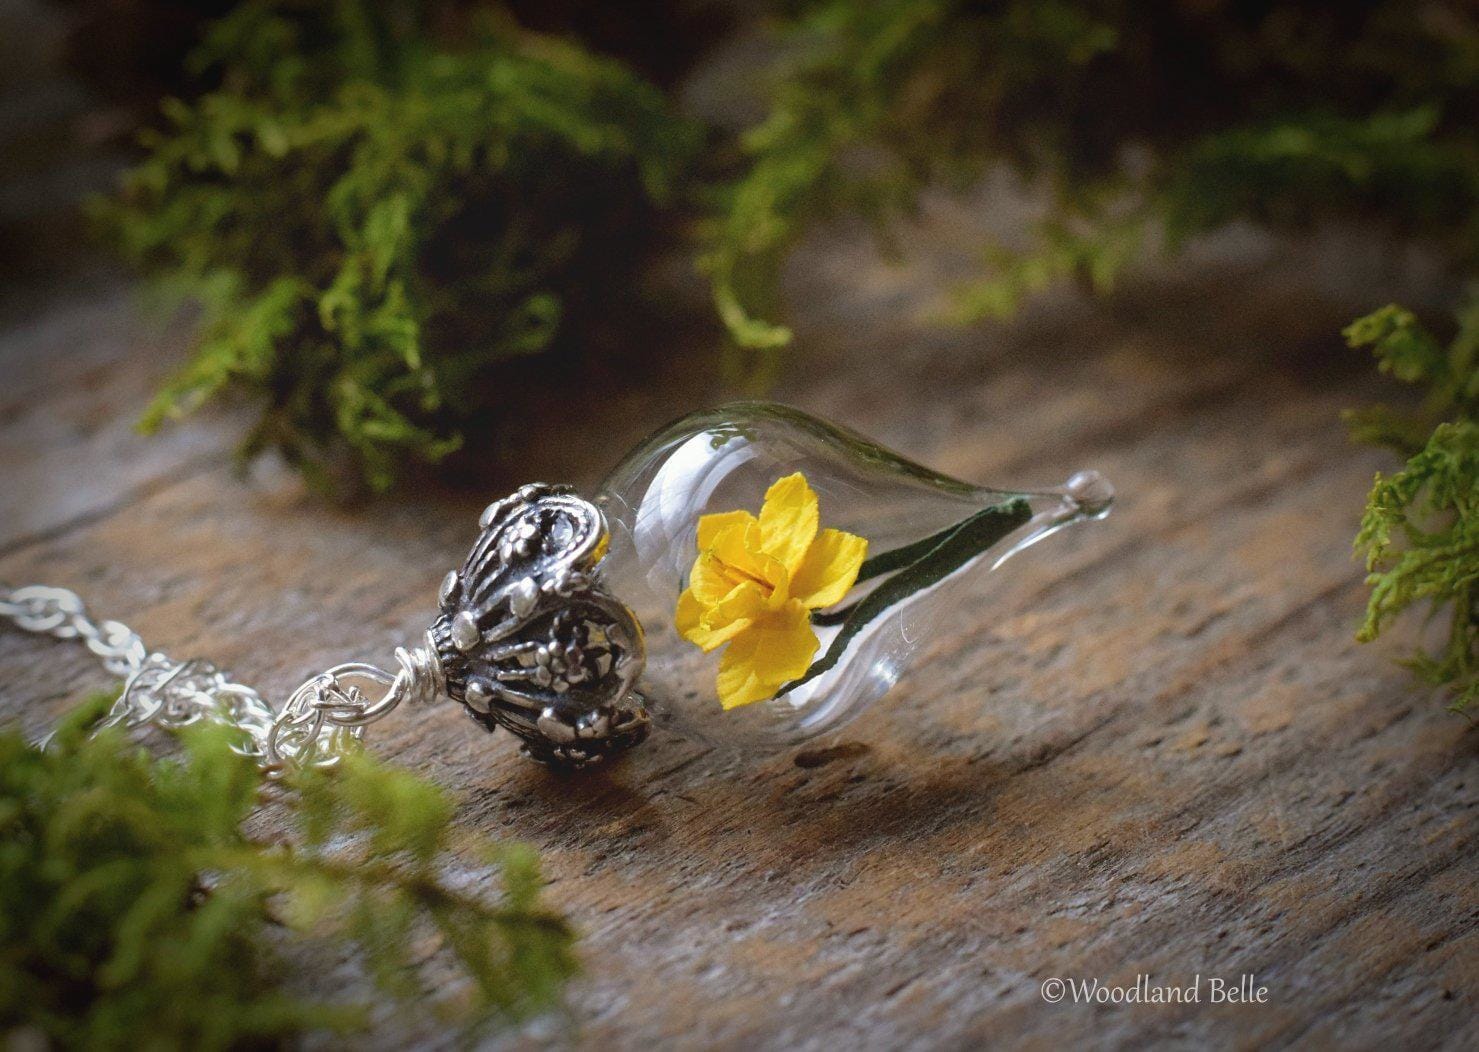 Daffodil Necklace - Yellow Daffodil Flower Glass Pendant - Sterling Silver, Gold, or Rose Gold - Personalized Gift - by Woodland Belle